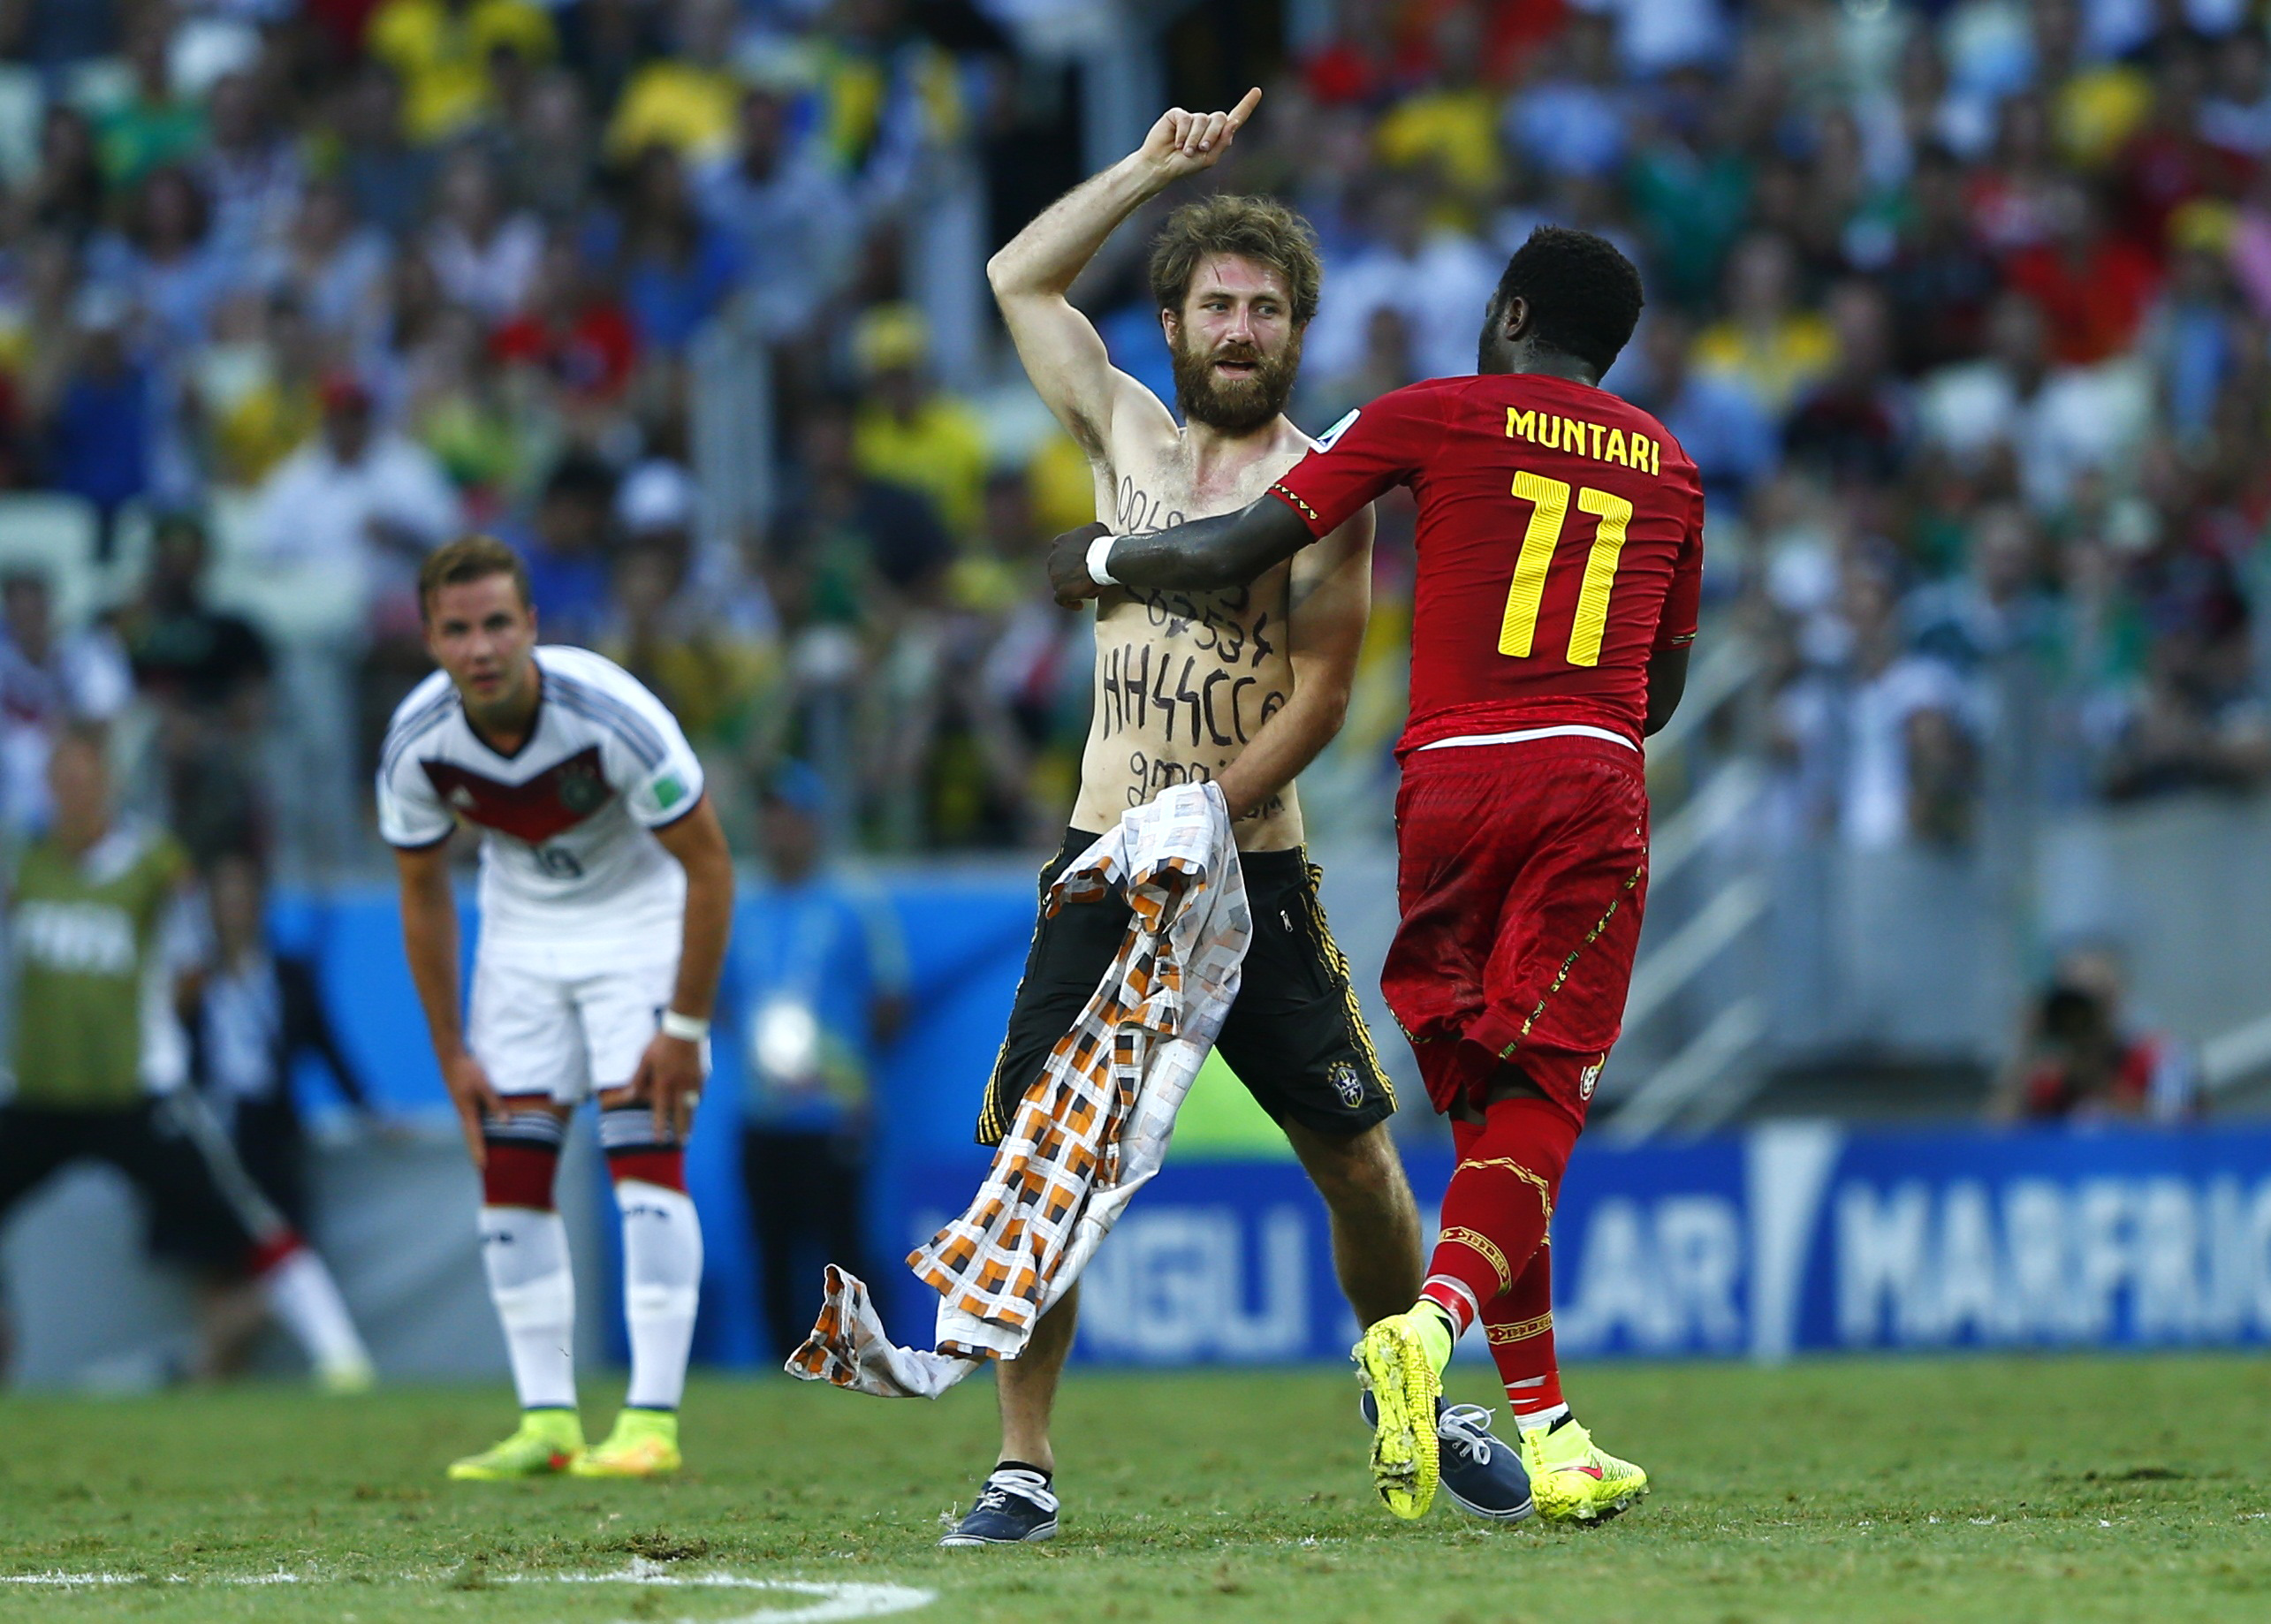 Ghana's Sulley Muntari helps a spectator off the field during the 2014 World Cup soccer match between Germany and Ghana on June 21, 2014. (Eddie Keogh/Reuters)